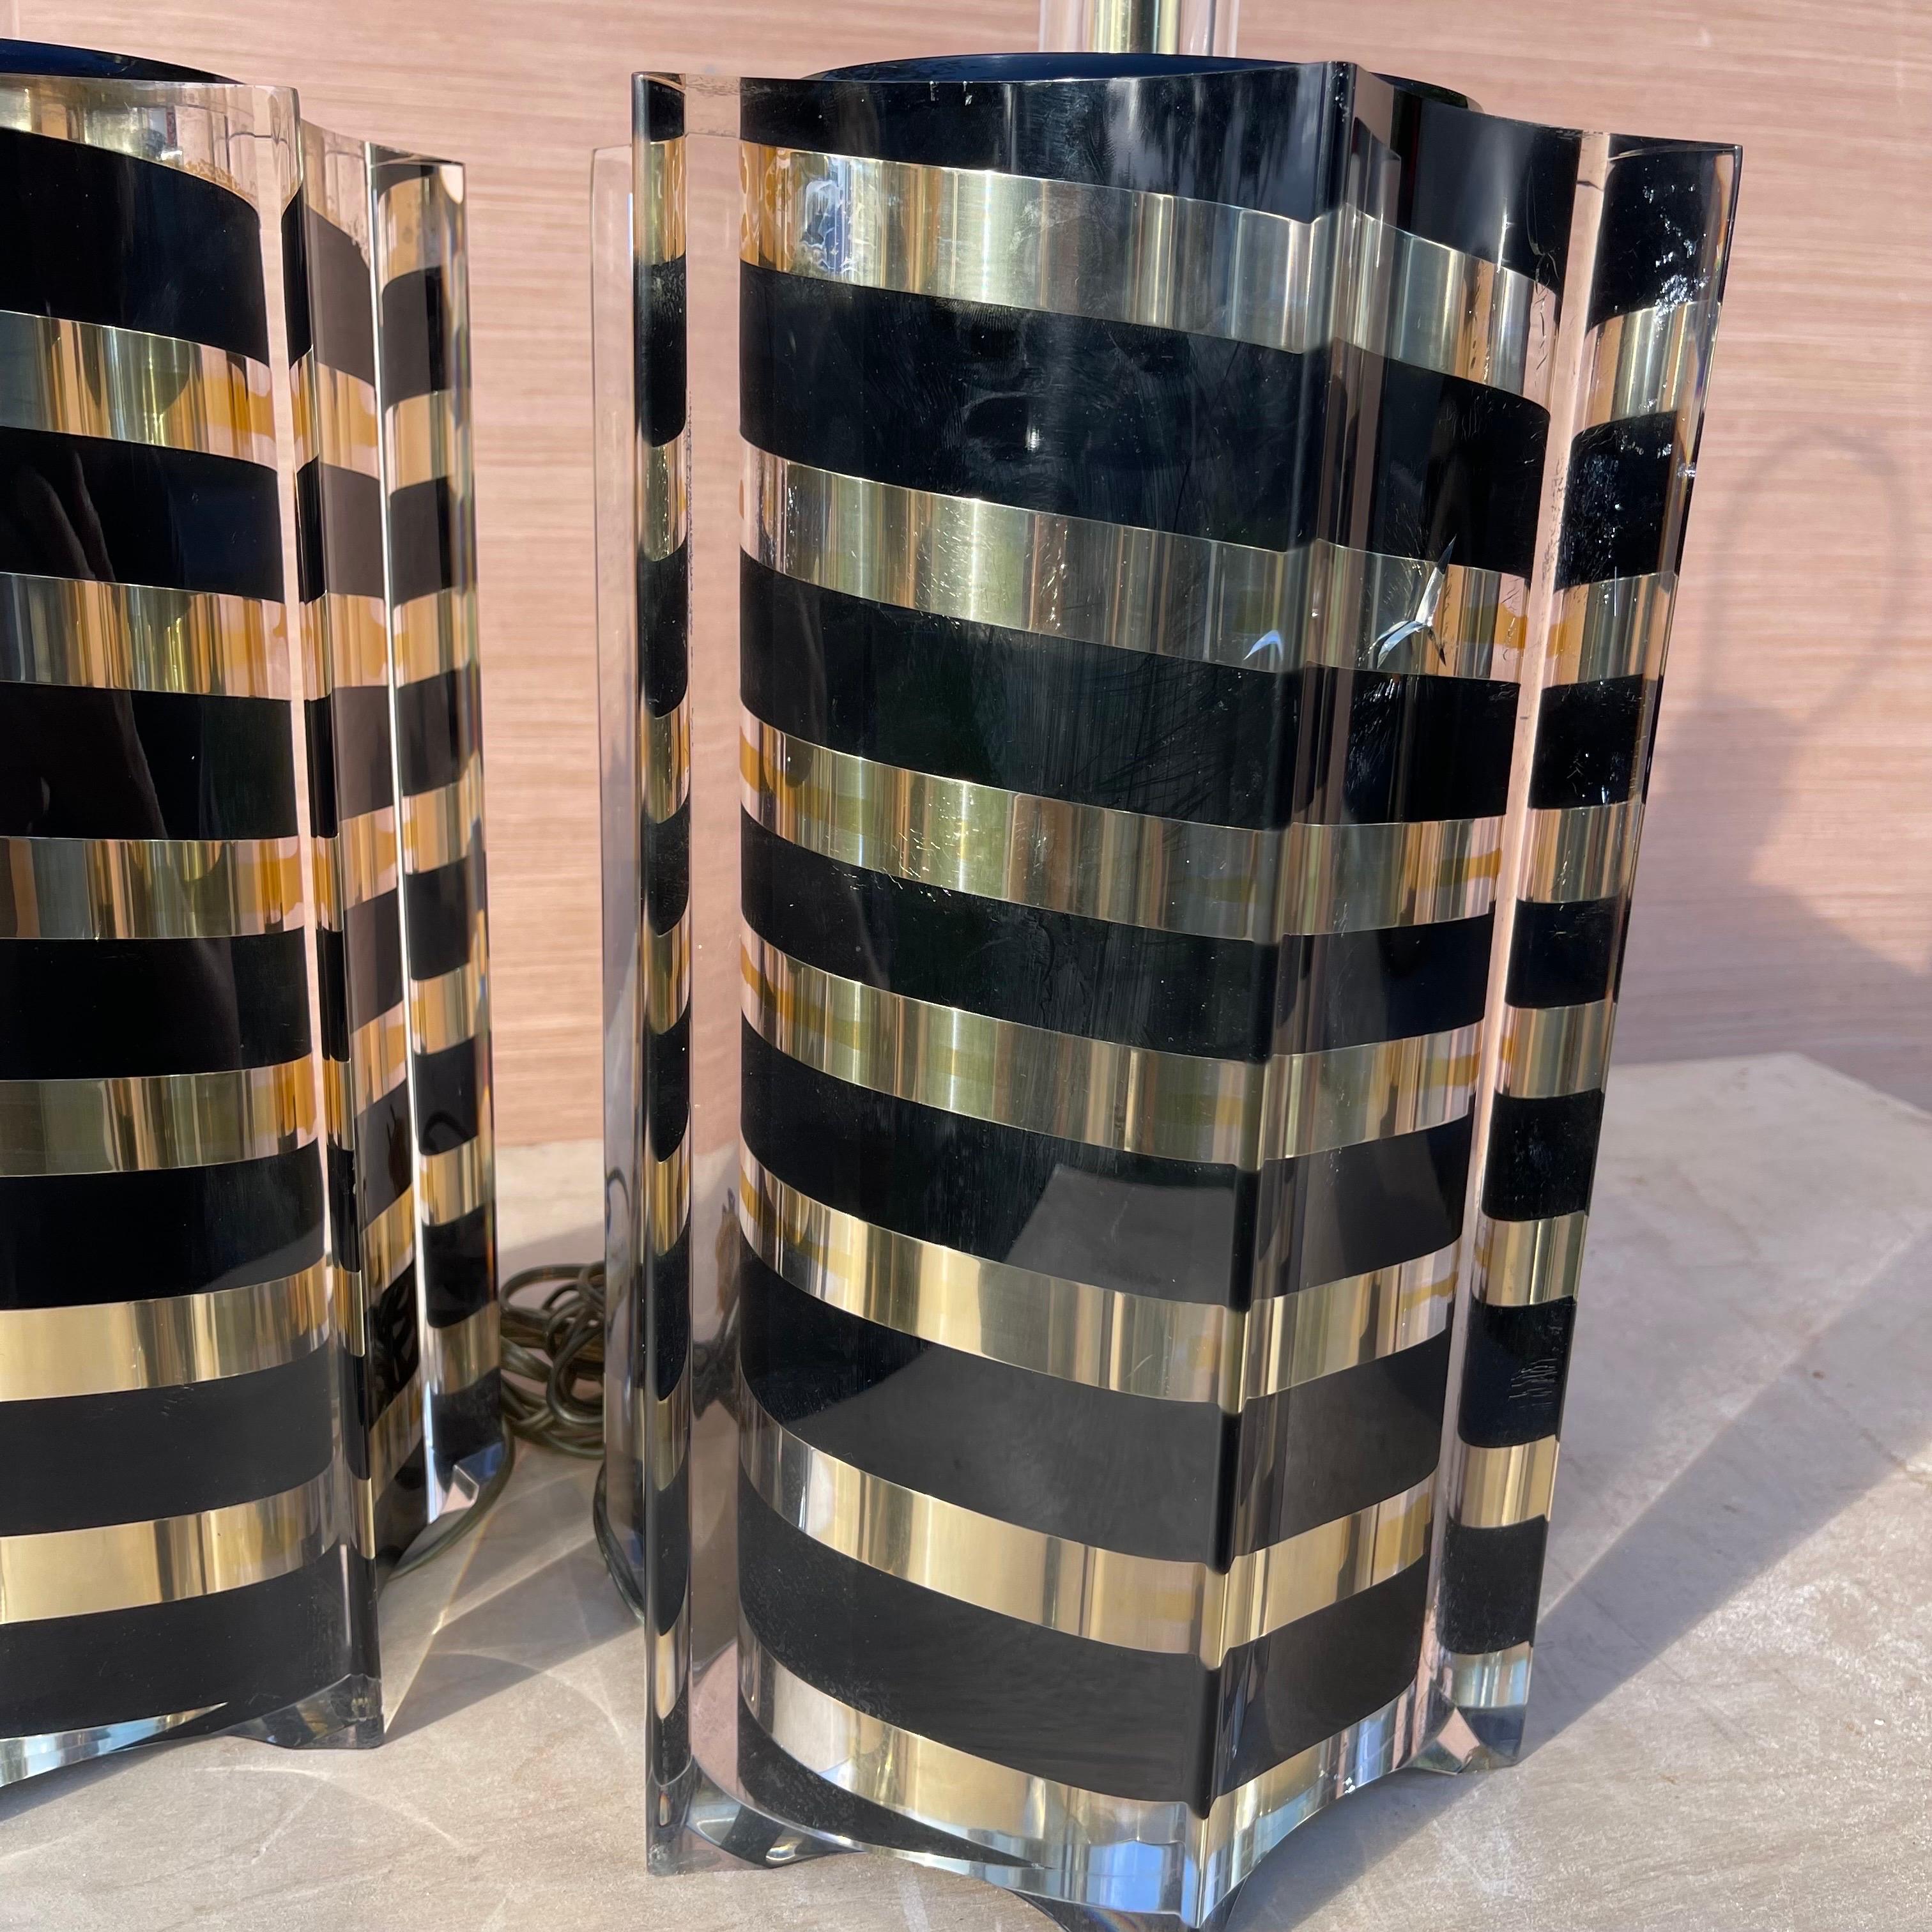 Postmodern Black & Gold Striped Lucite Lamps, Smart Italia Roma, 1980s - a Pair For Sale 3